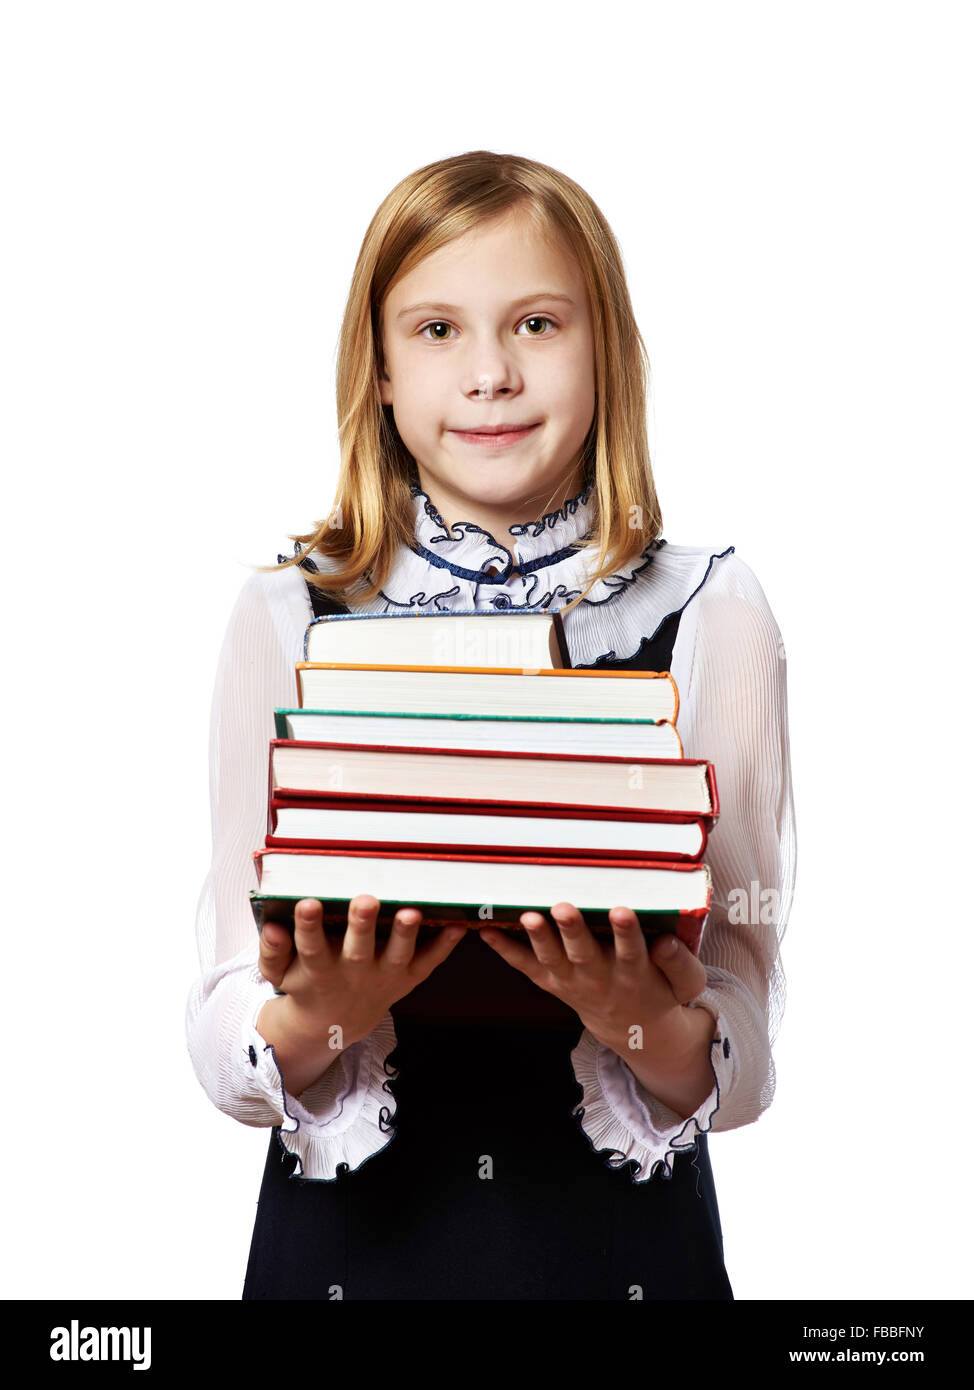 Girl schoolgirl with a heavy stack of books isolated Stock Photo